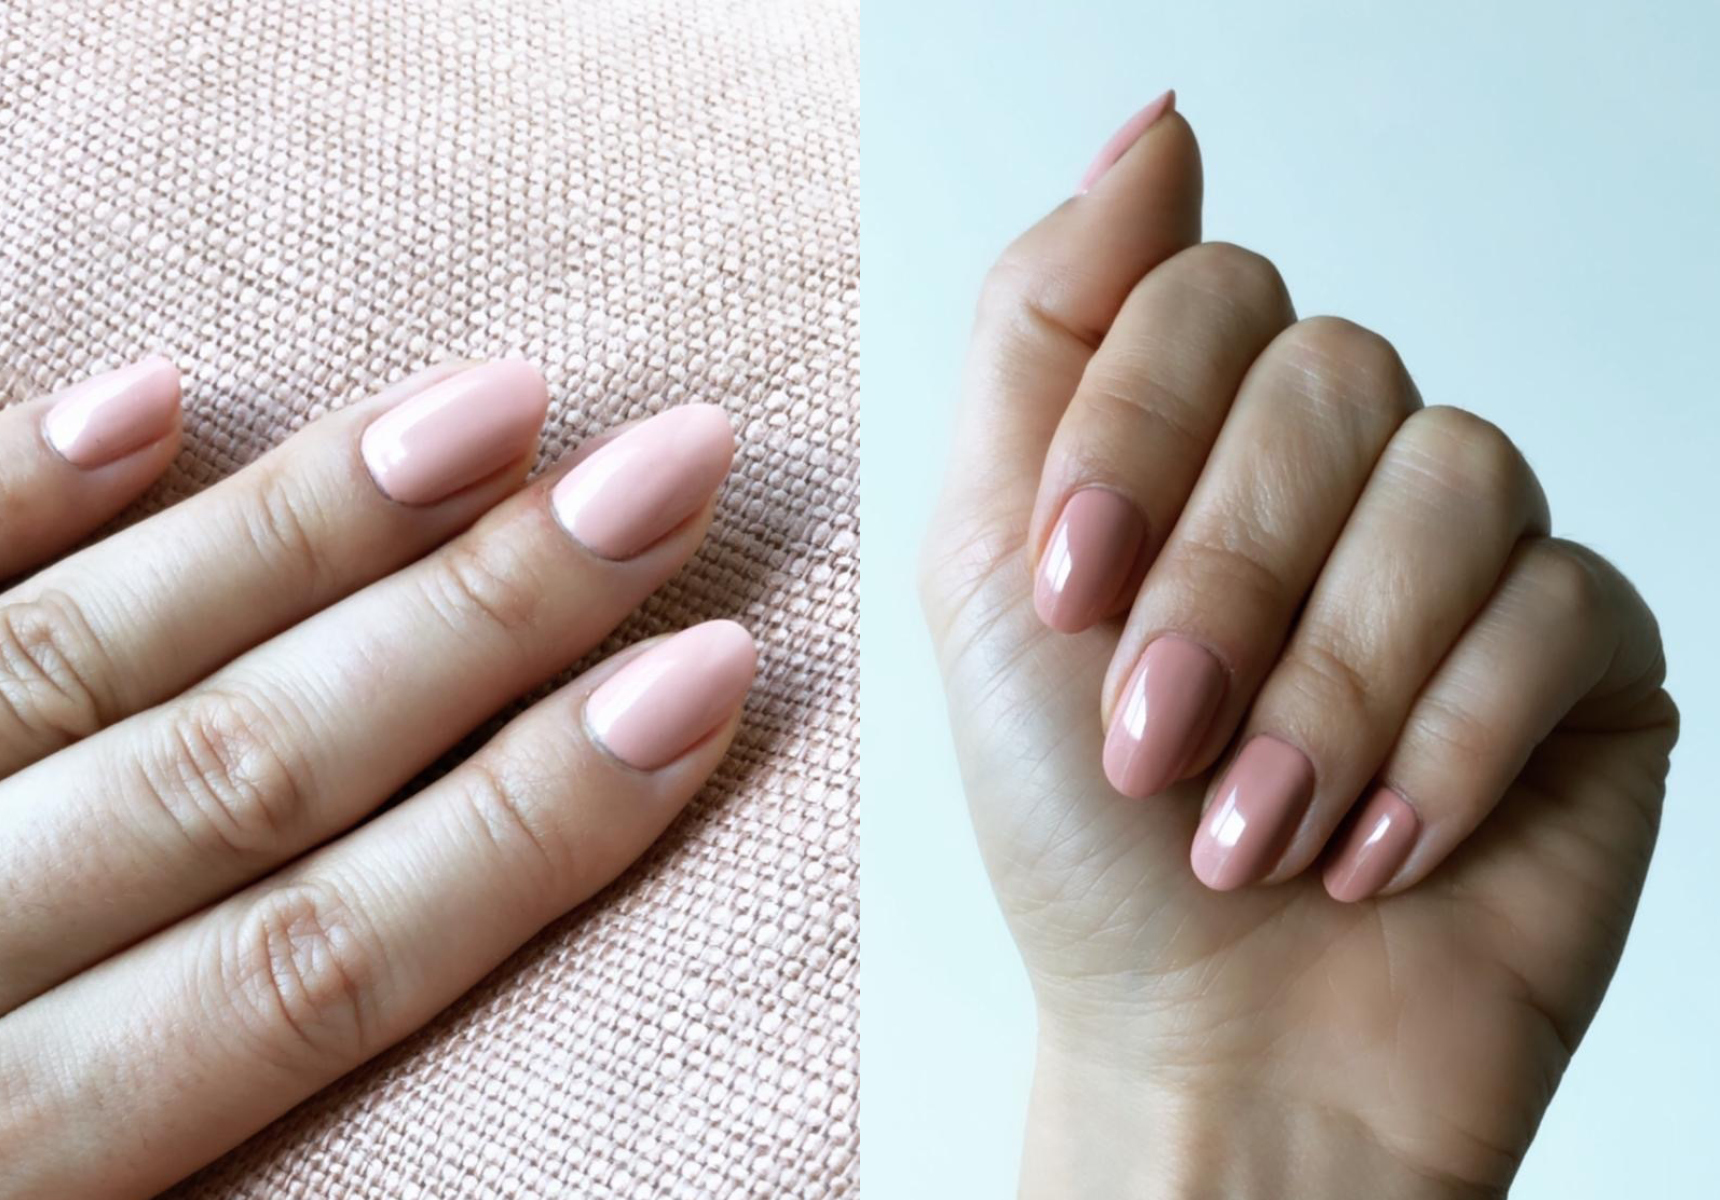 5 Kitchen Ingredients For The Perfect DIY Manicure